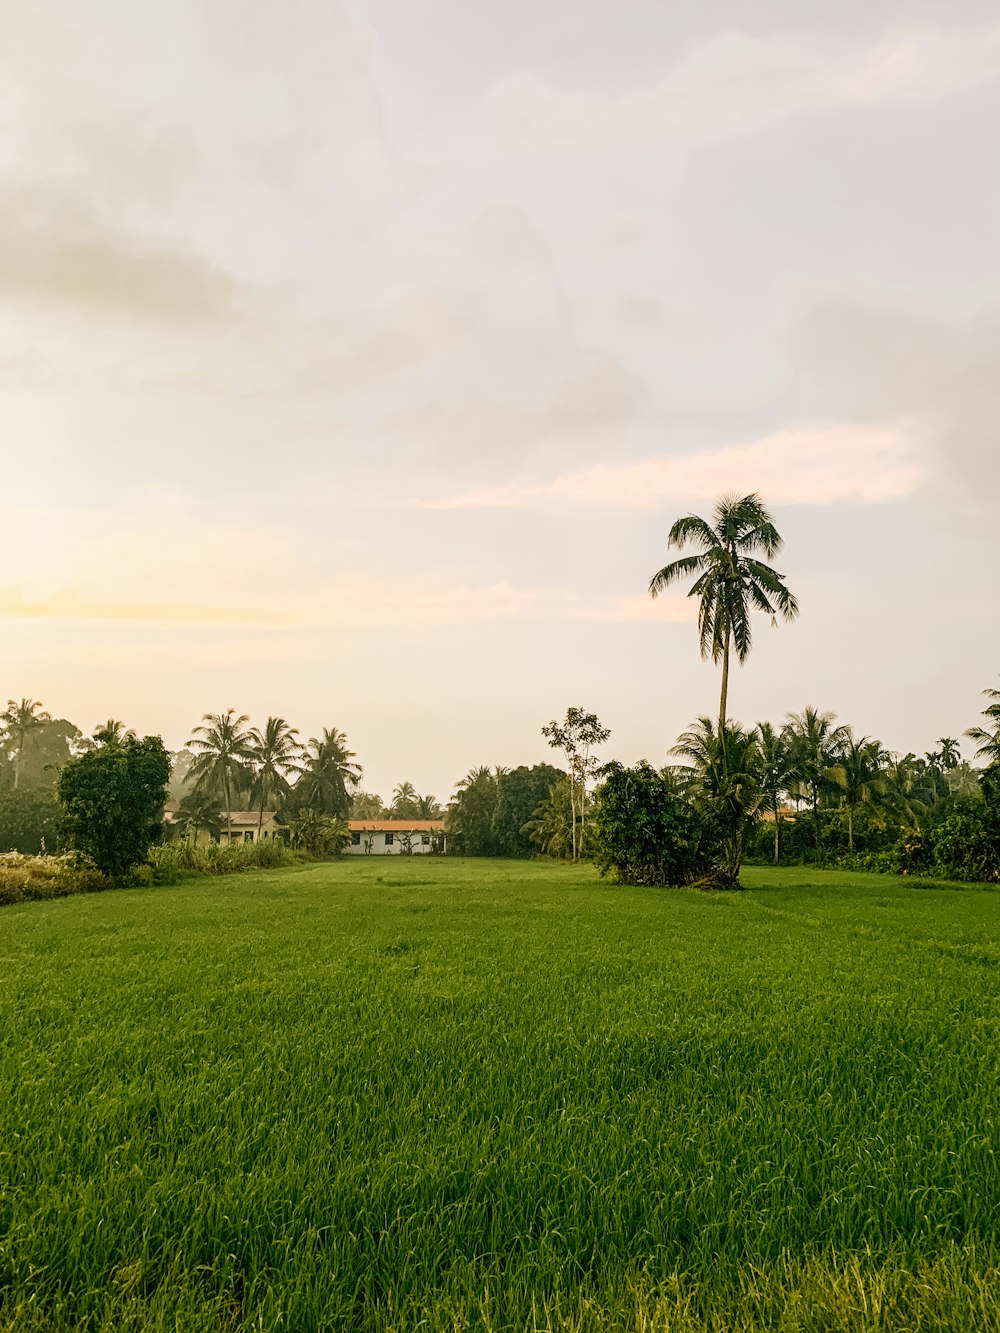 a lush green field with a palm tree in the distance